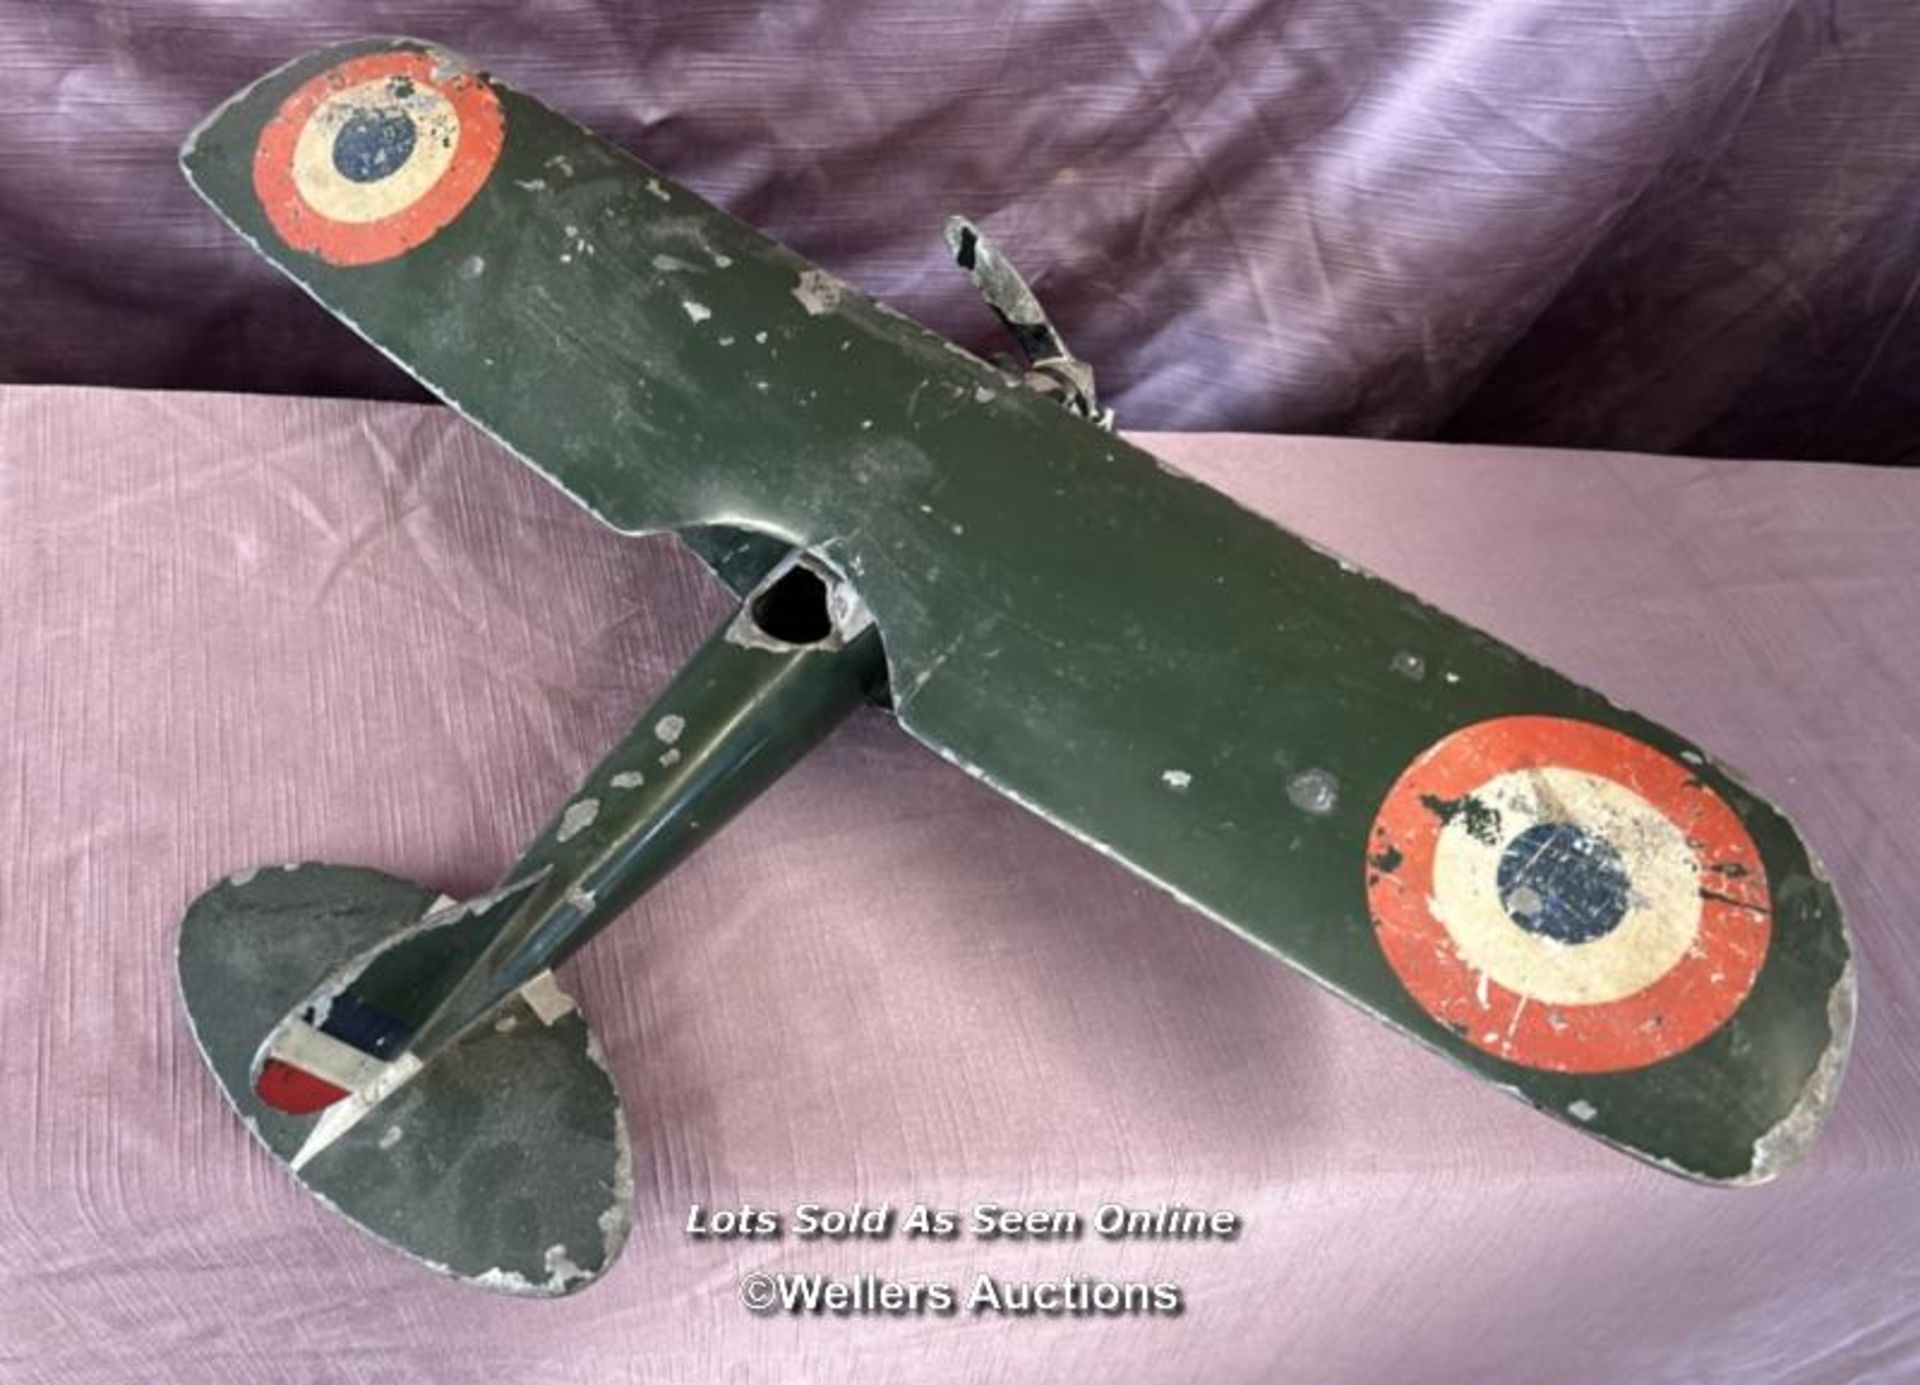 1:72 SCALE ROUGH BUILT METAL MODEL AIRPLANE WORLD WAR ONE FRENCH NIEUPORT-DELAGE NID 52 - Image 5 of 5